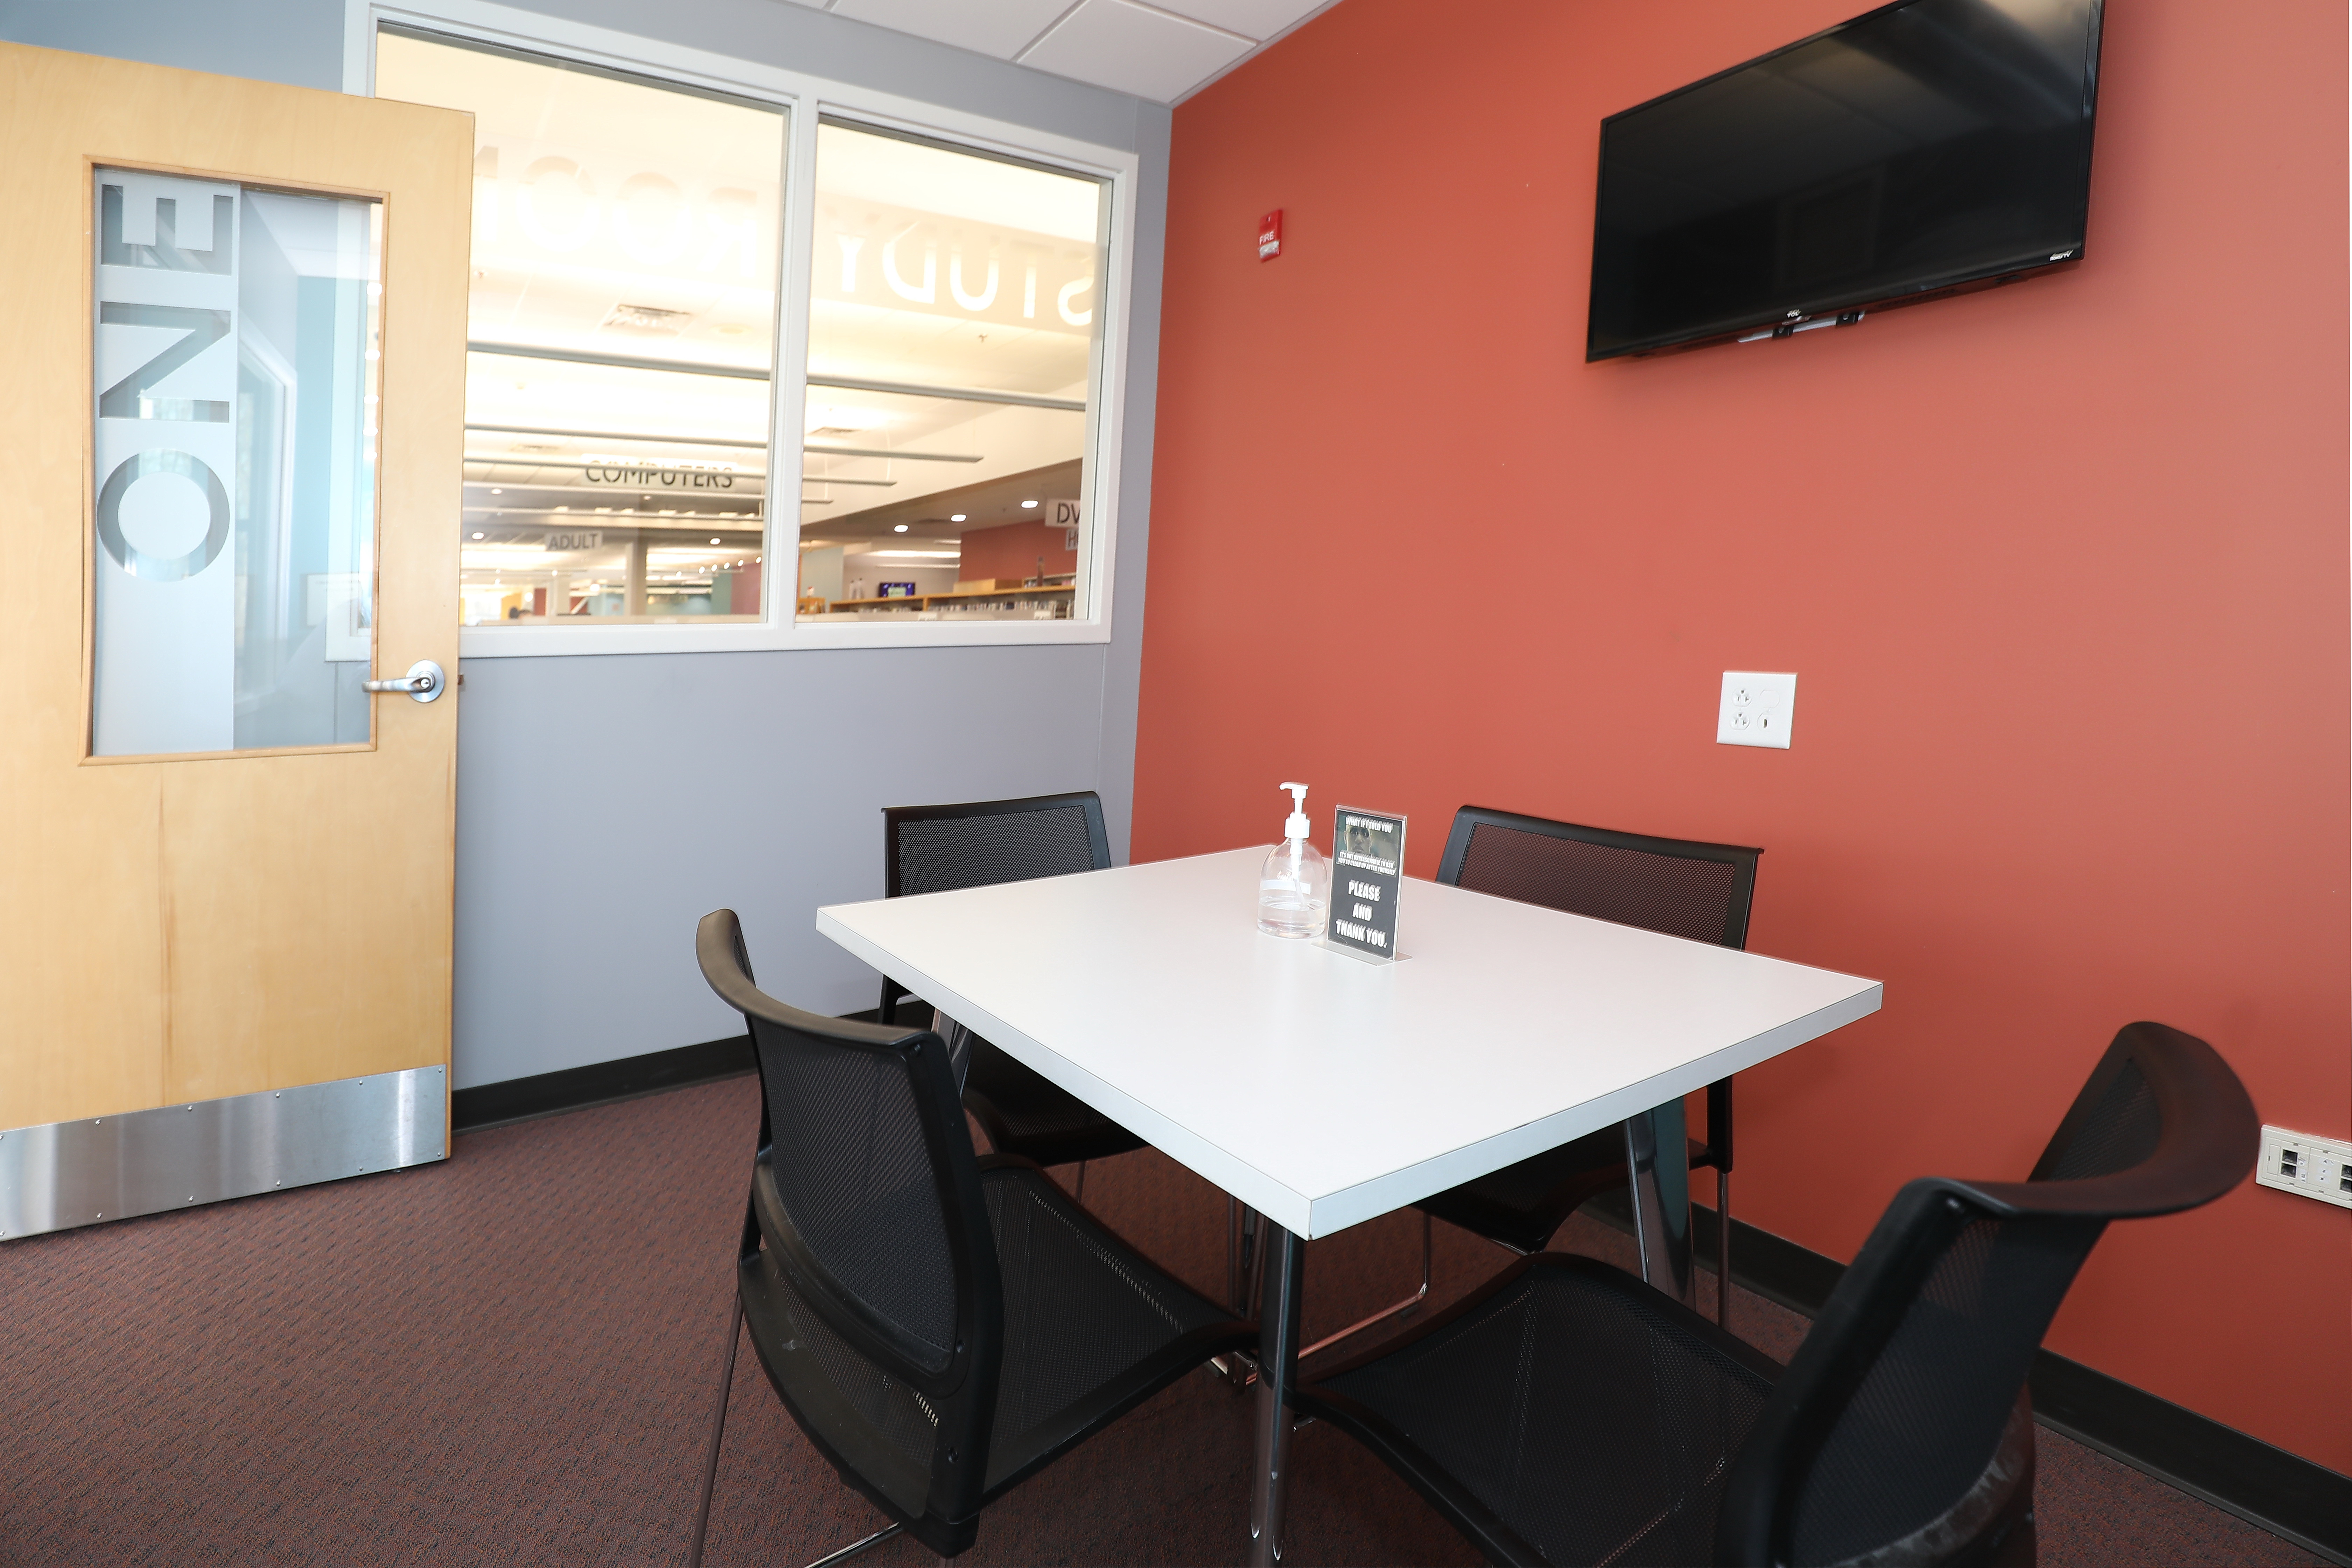 The study room allows individuals or small groups to meet, study, or have a quiet space to work during regular library hours.